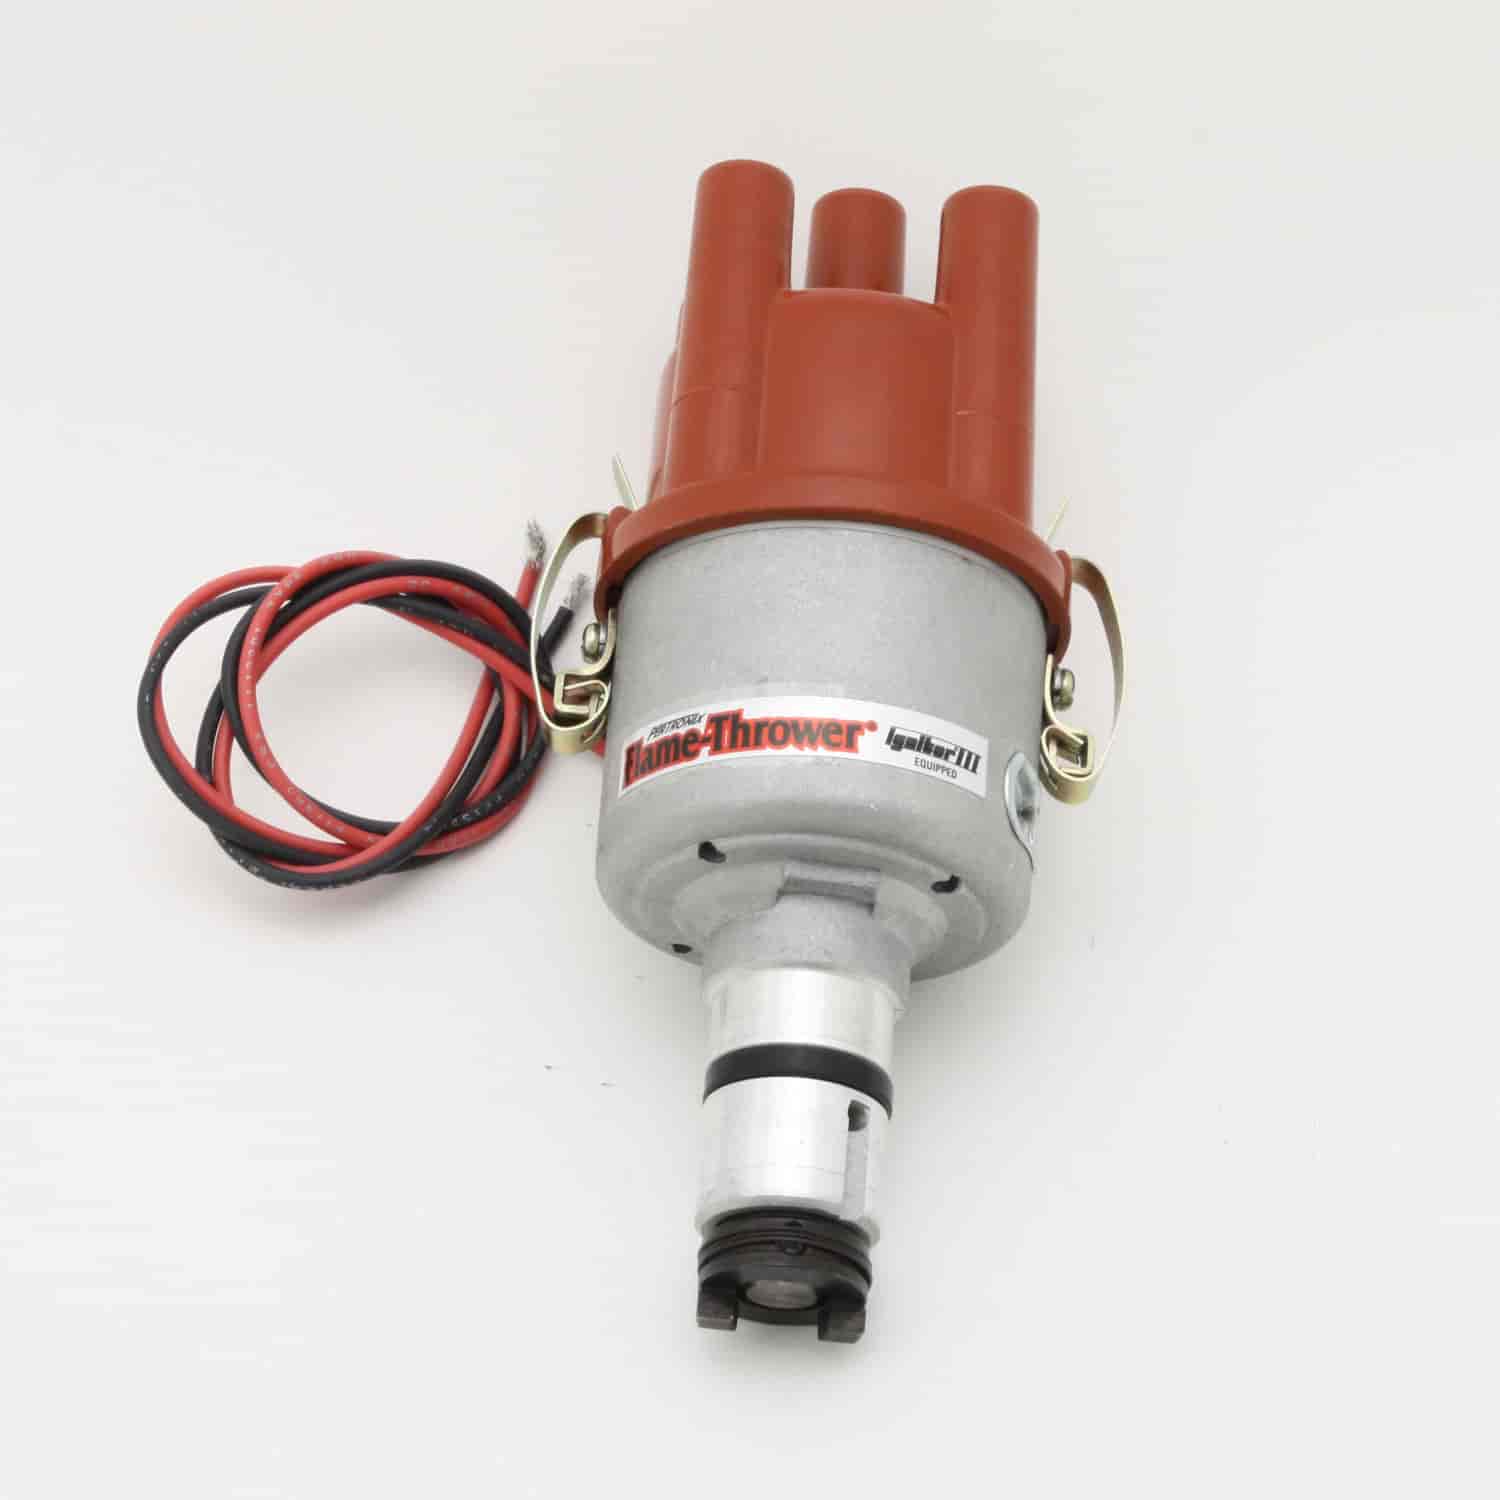 PerTronix D182604 Flame-Thrower Electronic Distributor Cast VW Type 1 Engine Plug and Play with Ignitor III Non Vacuum